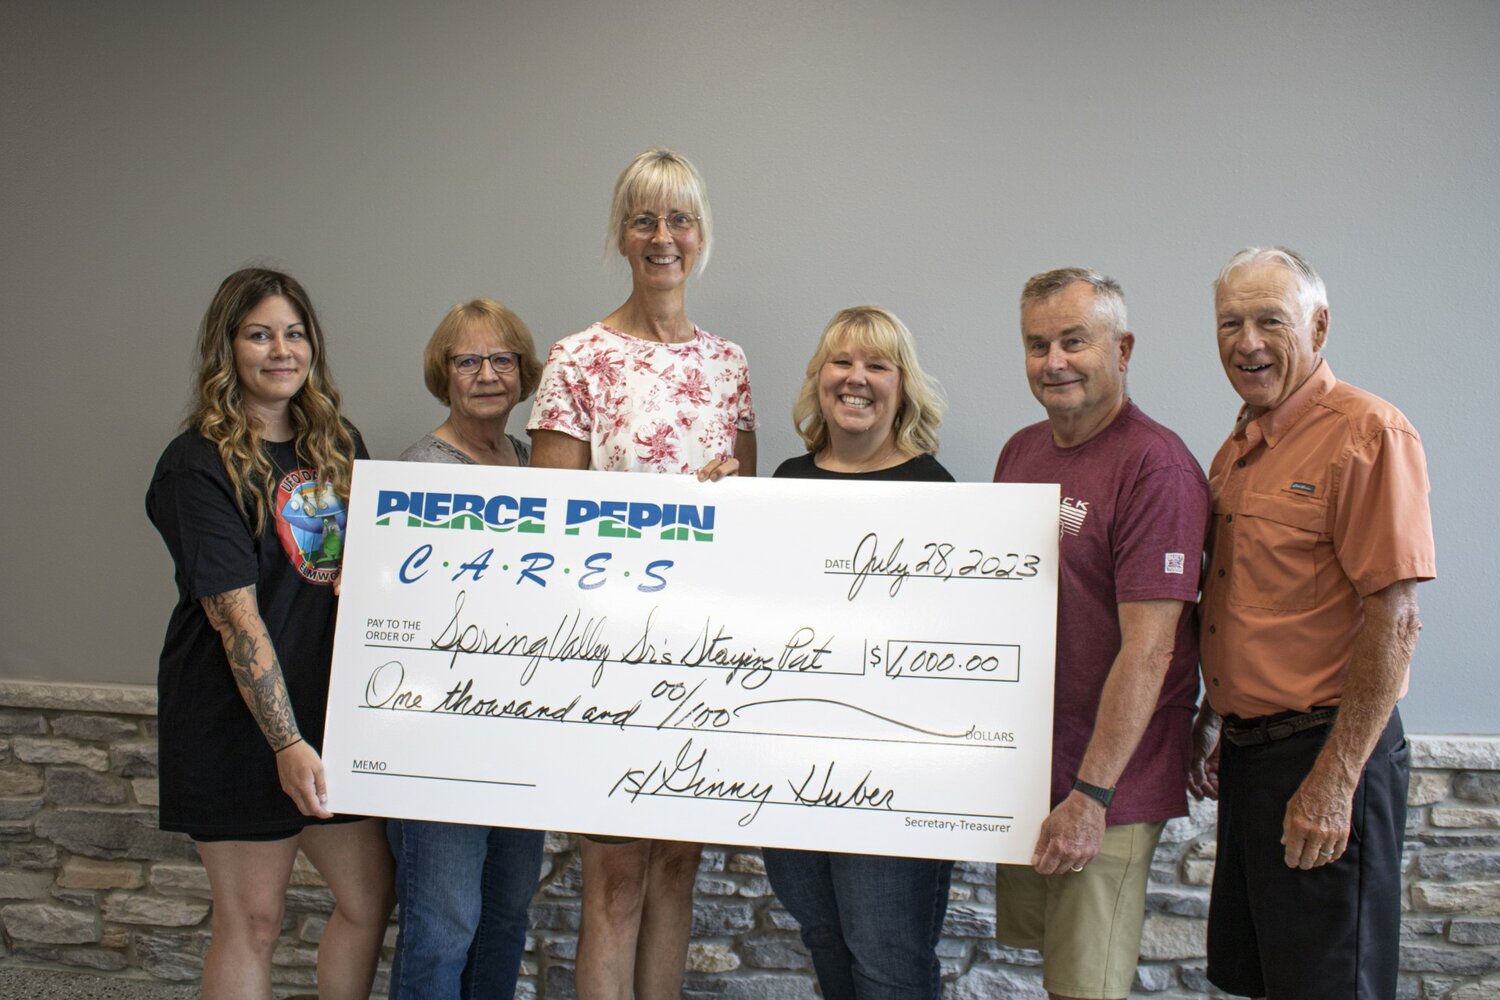 The Spring Valley Seniors grant will be used to include a second instructor for its Strong Bodies Fitness program. Pictured (from left): Cari Cornelius, Janice Ottman, Sue Christopher, Charity Lubich, PPCS vice president, member relations and human resources; Don Fritz, and Rich O'Connell.